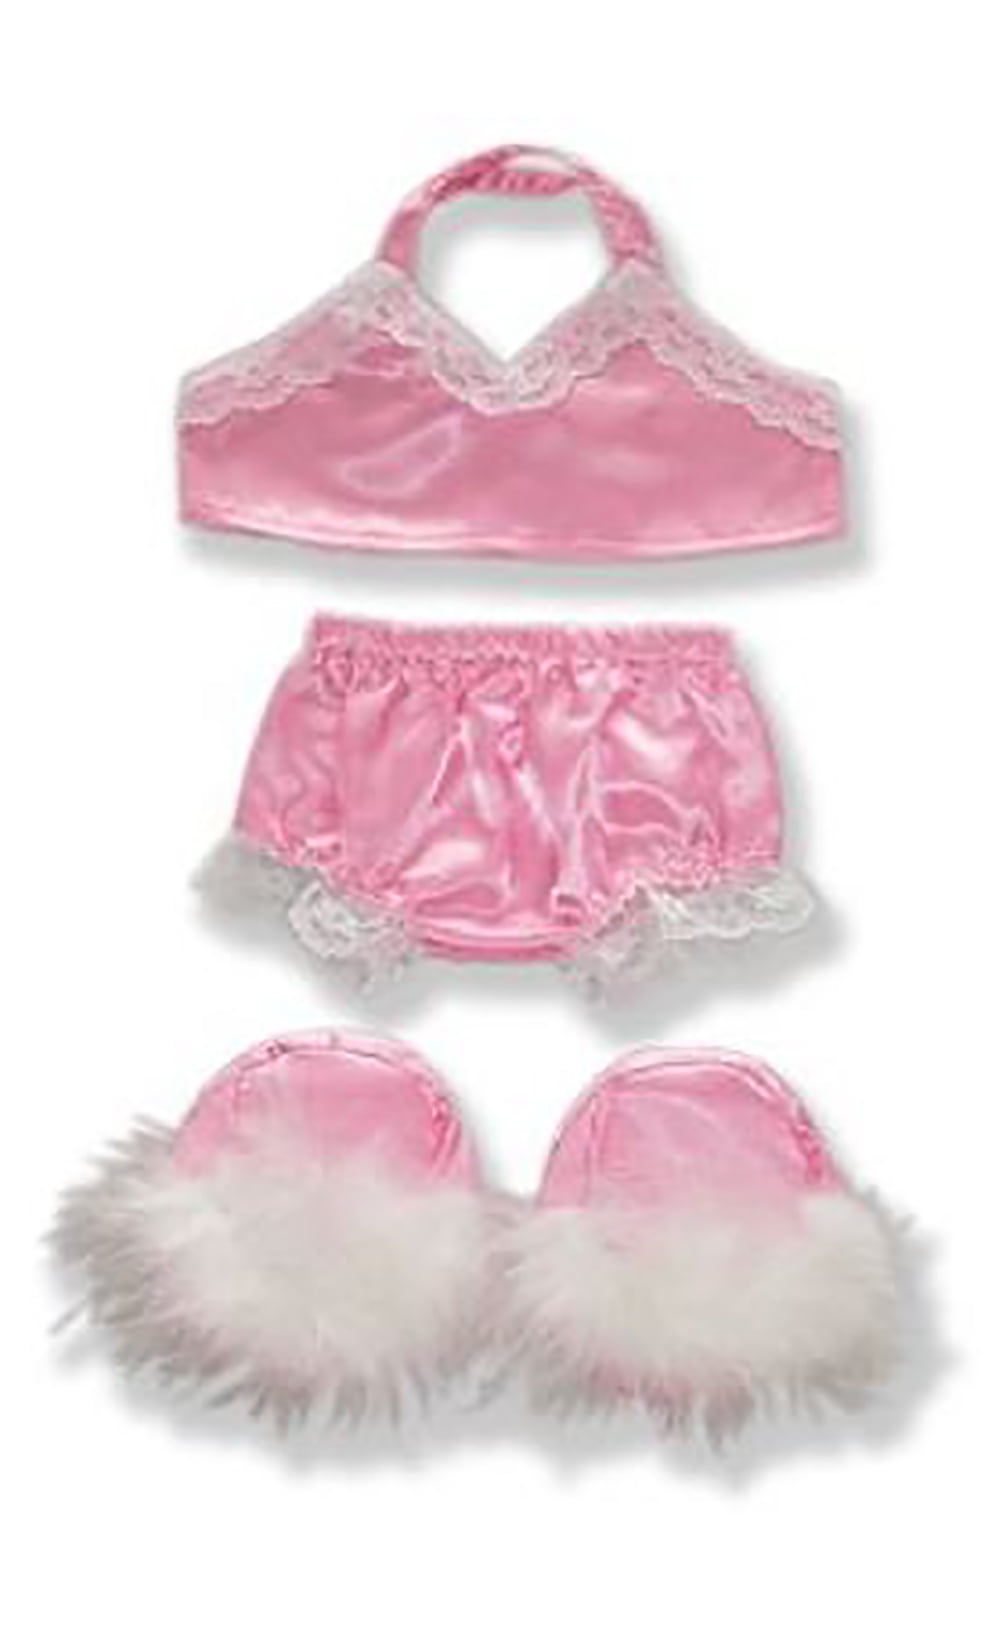 Pink T-Shirt Outfit Teddy Bear Clothes Fits Most 14"-18" Build-a-bear and Make Y 